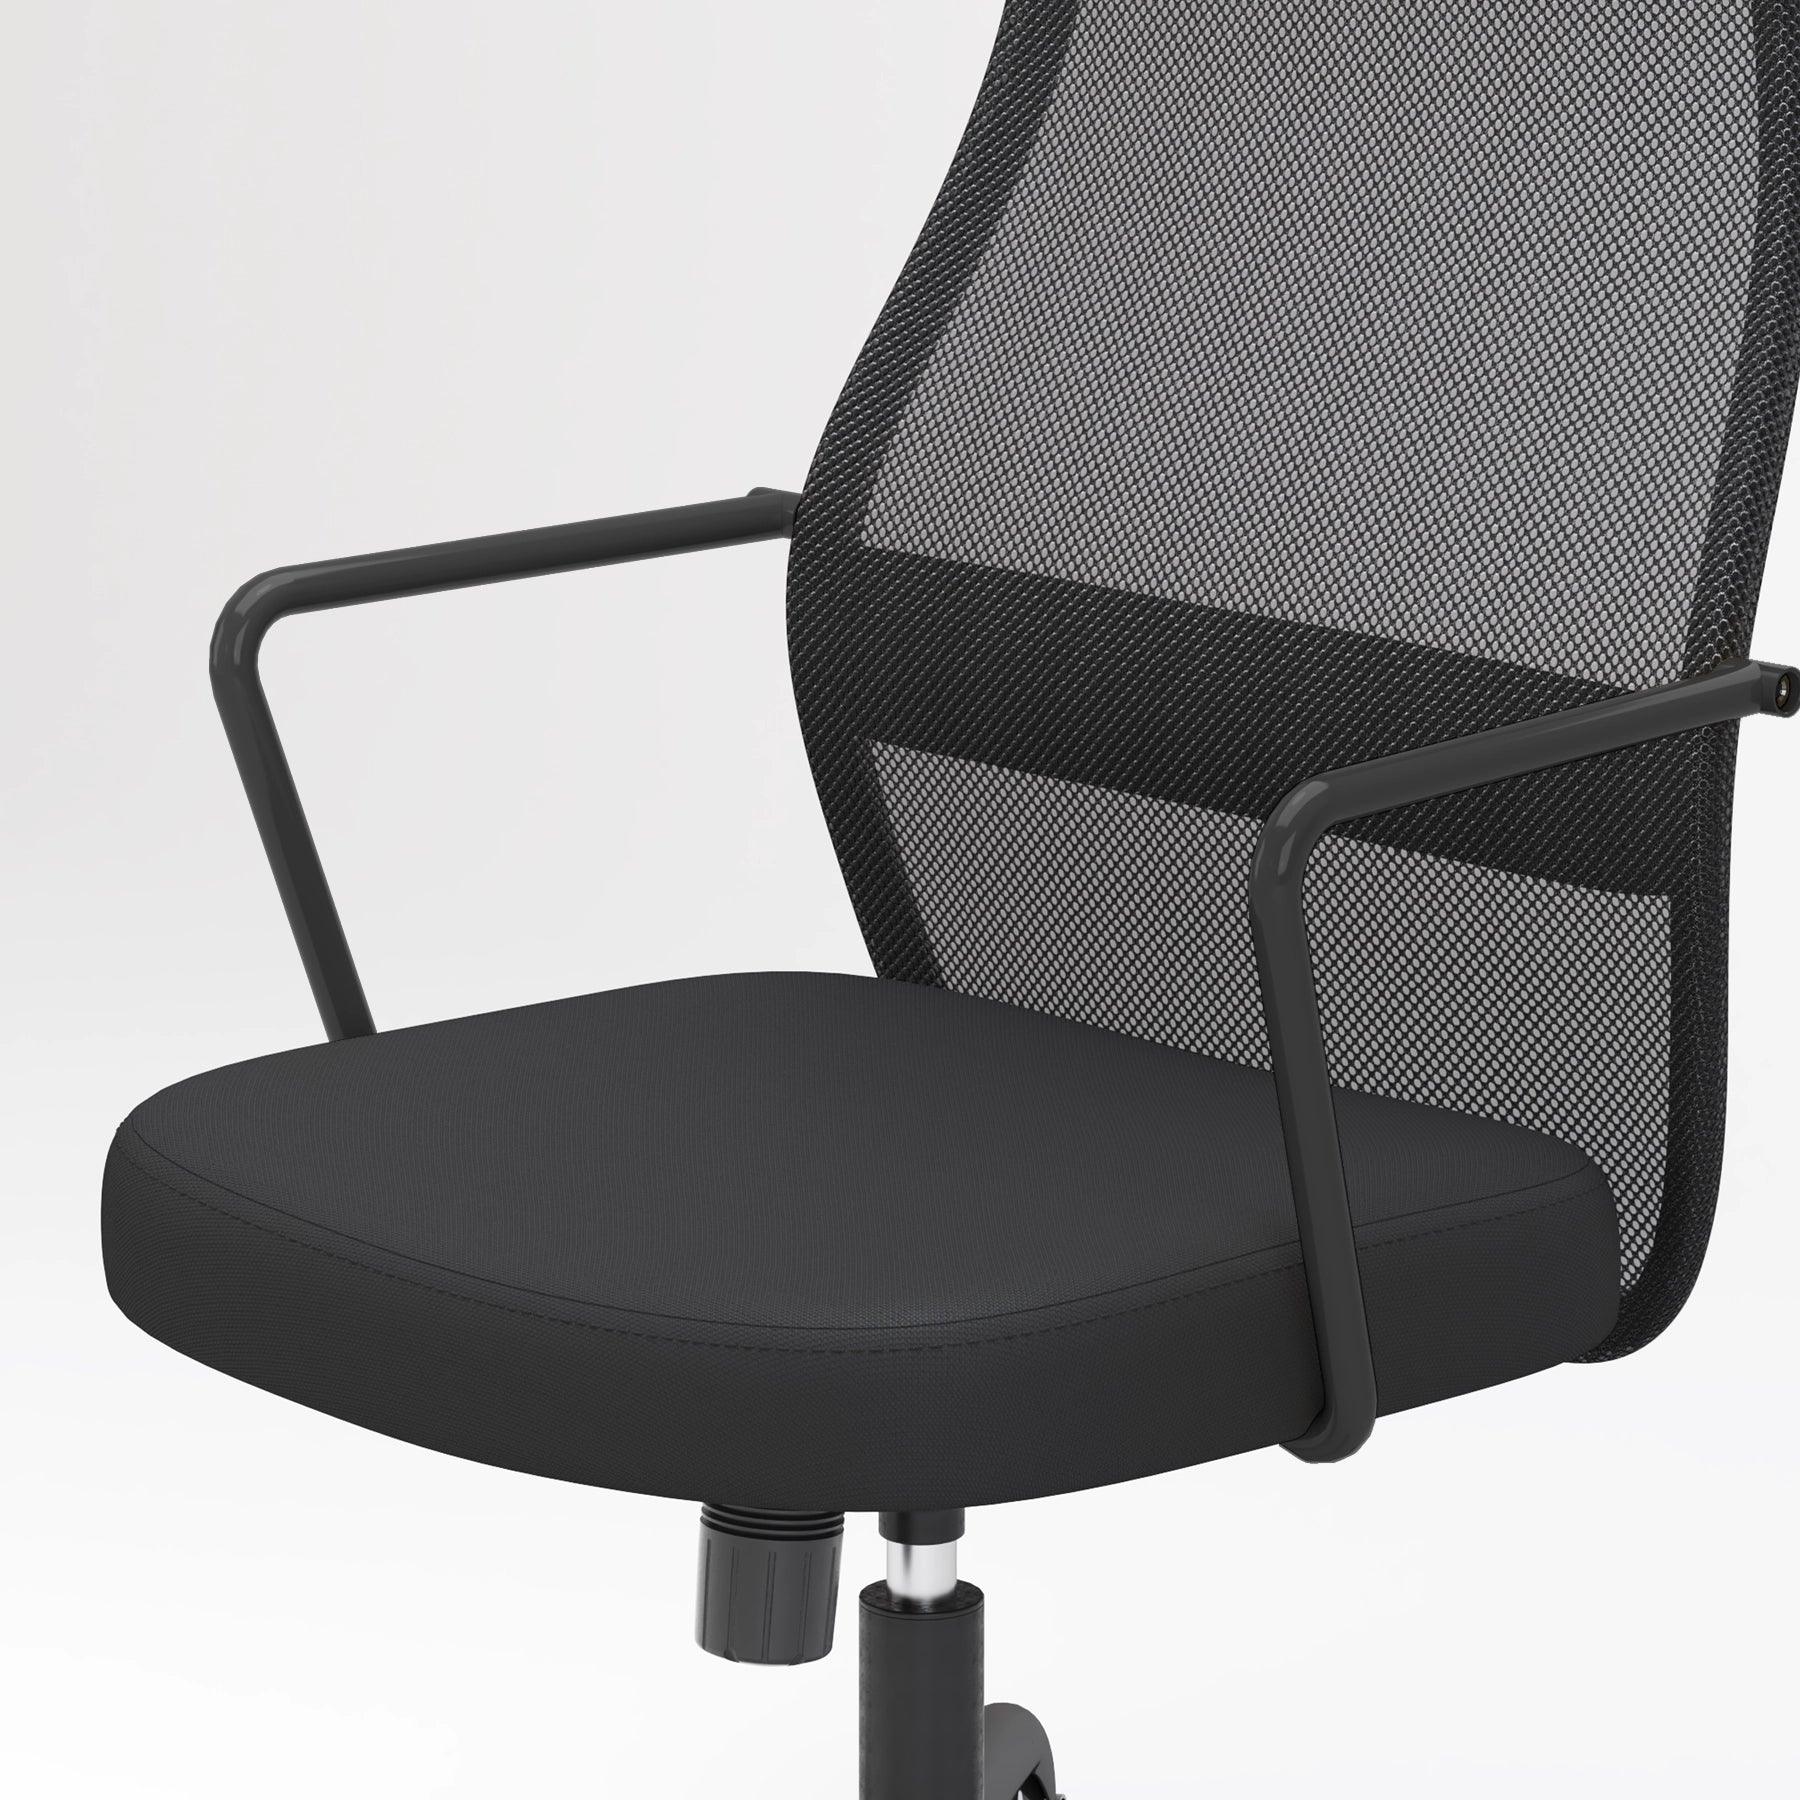 Sihoo M90D Ergonomic Chair with Adaptive Lumbar Support Red